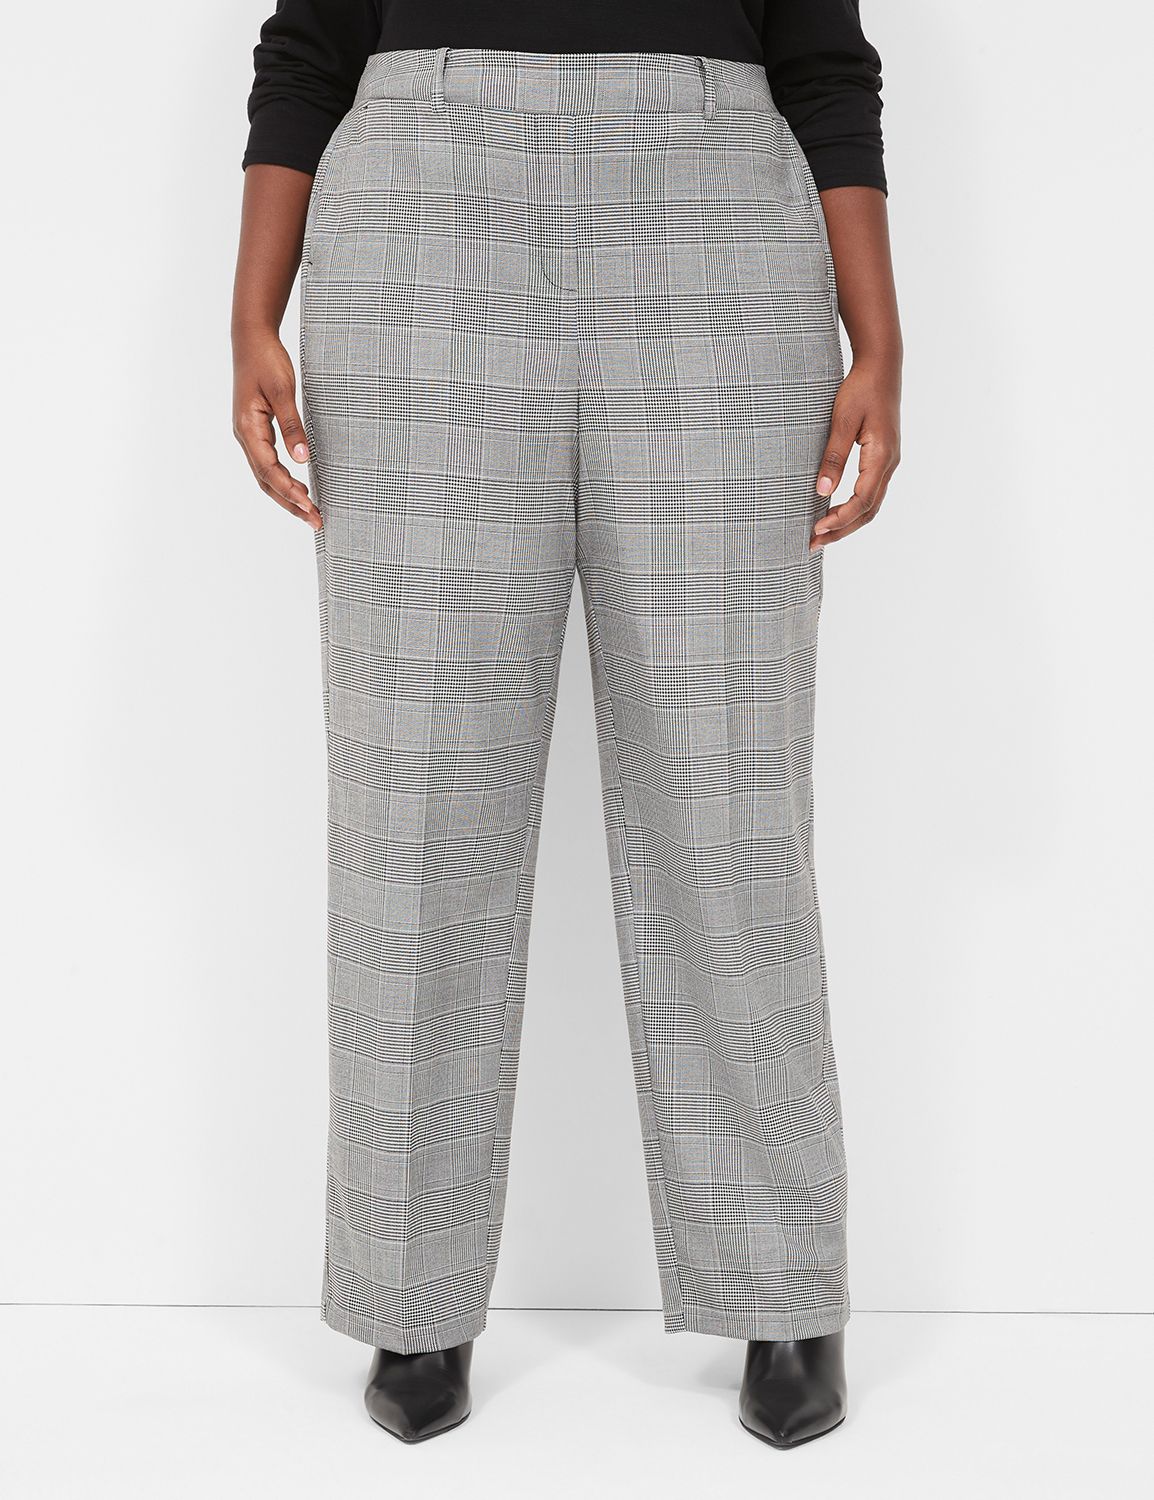 Style & Co. Plus Size Houndstooth Pull-on Ponte Pants in Gray